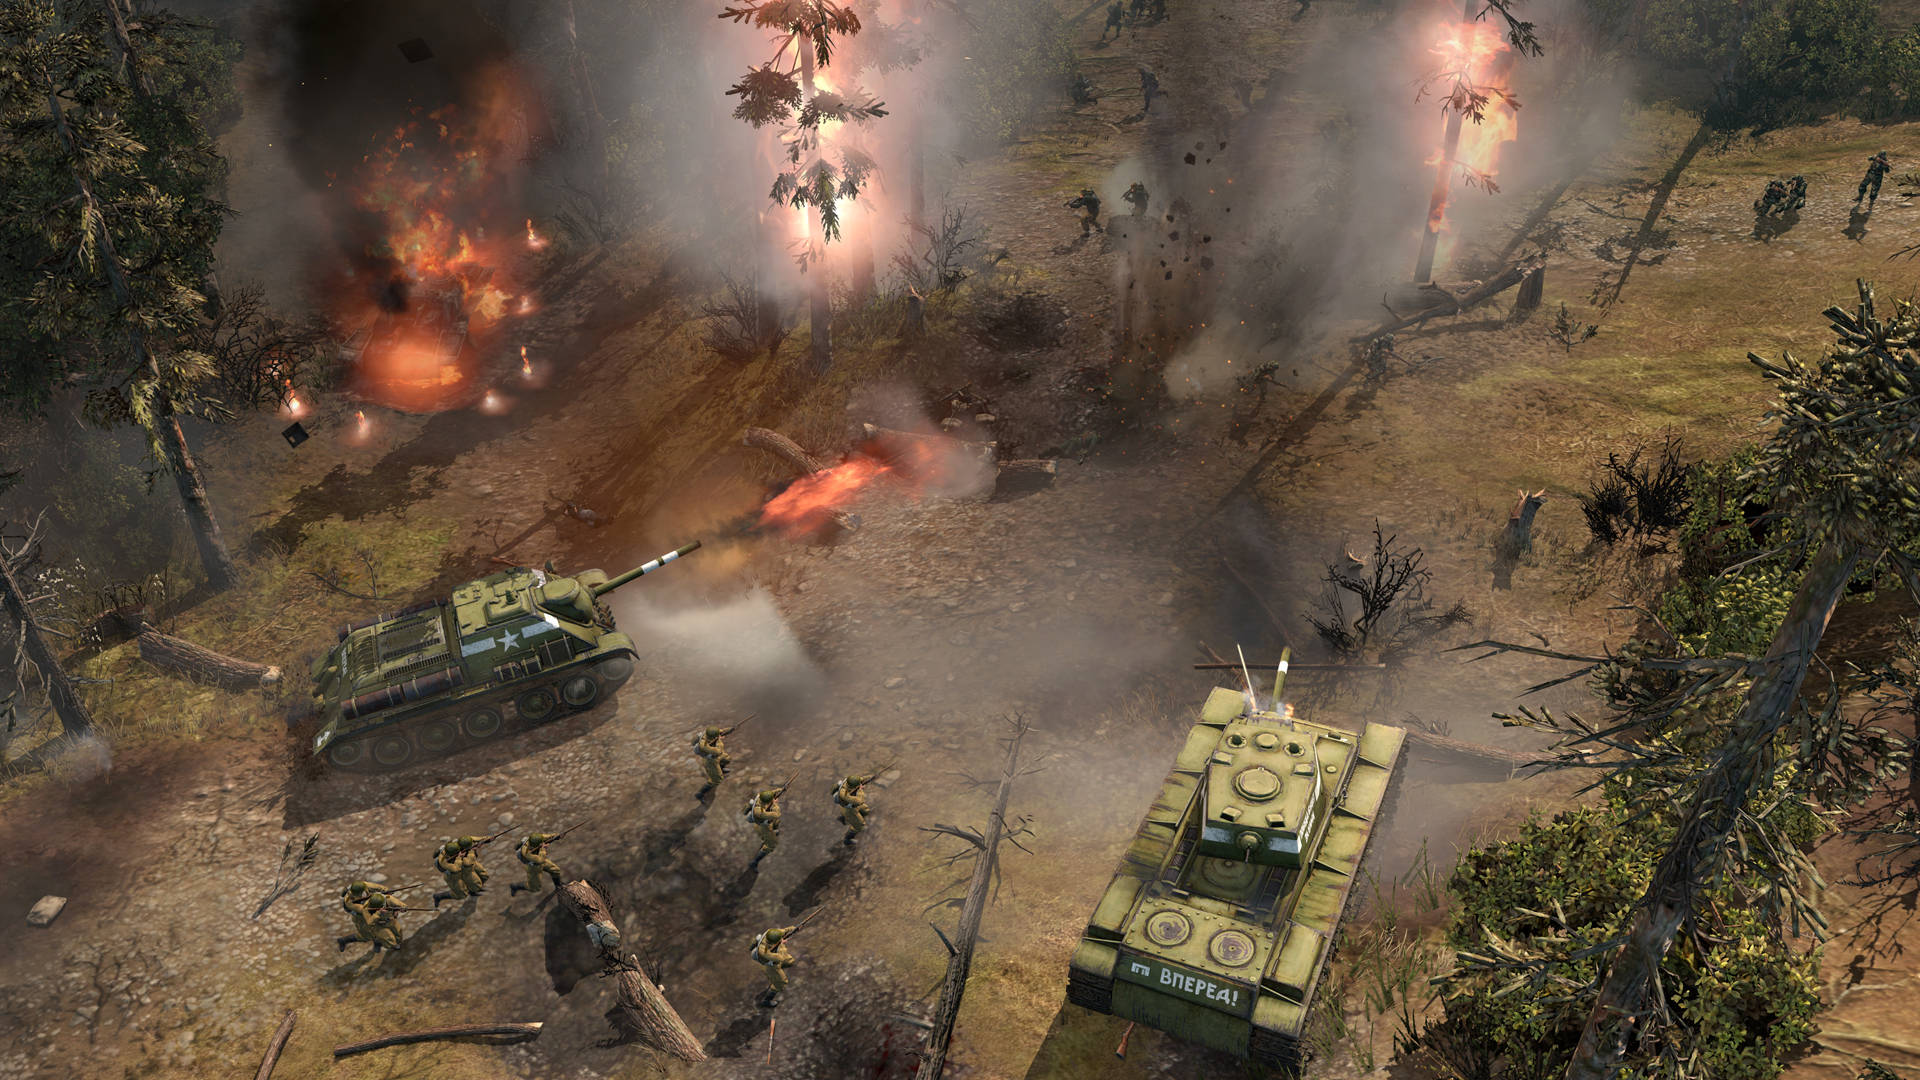 Company Of Heroes 2 Burning Trees Wallpaper